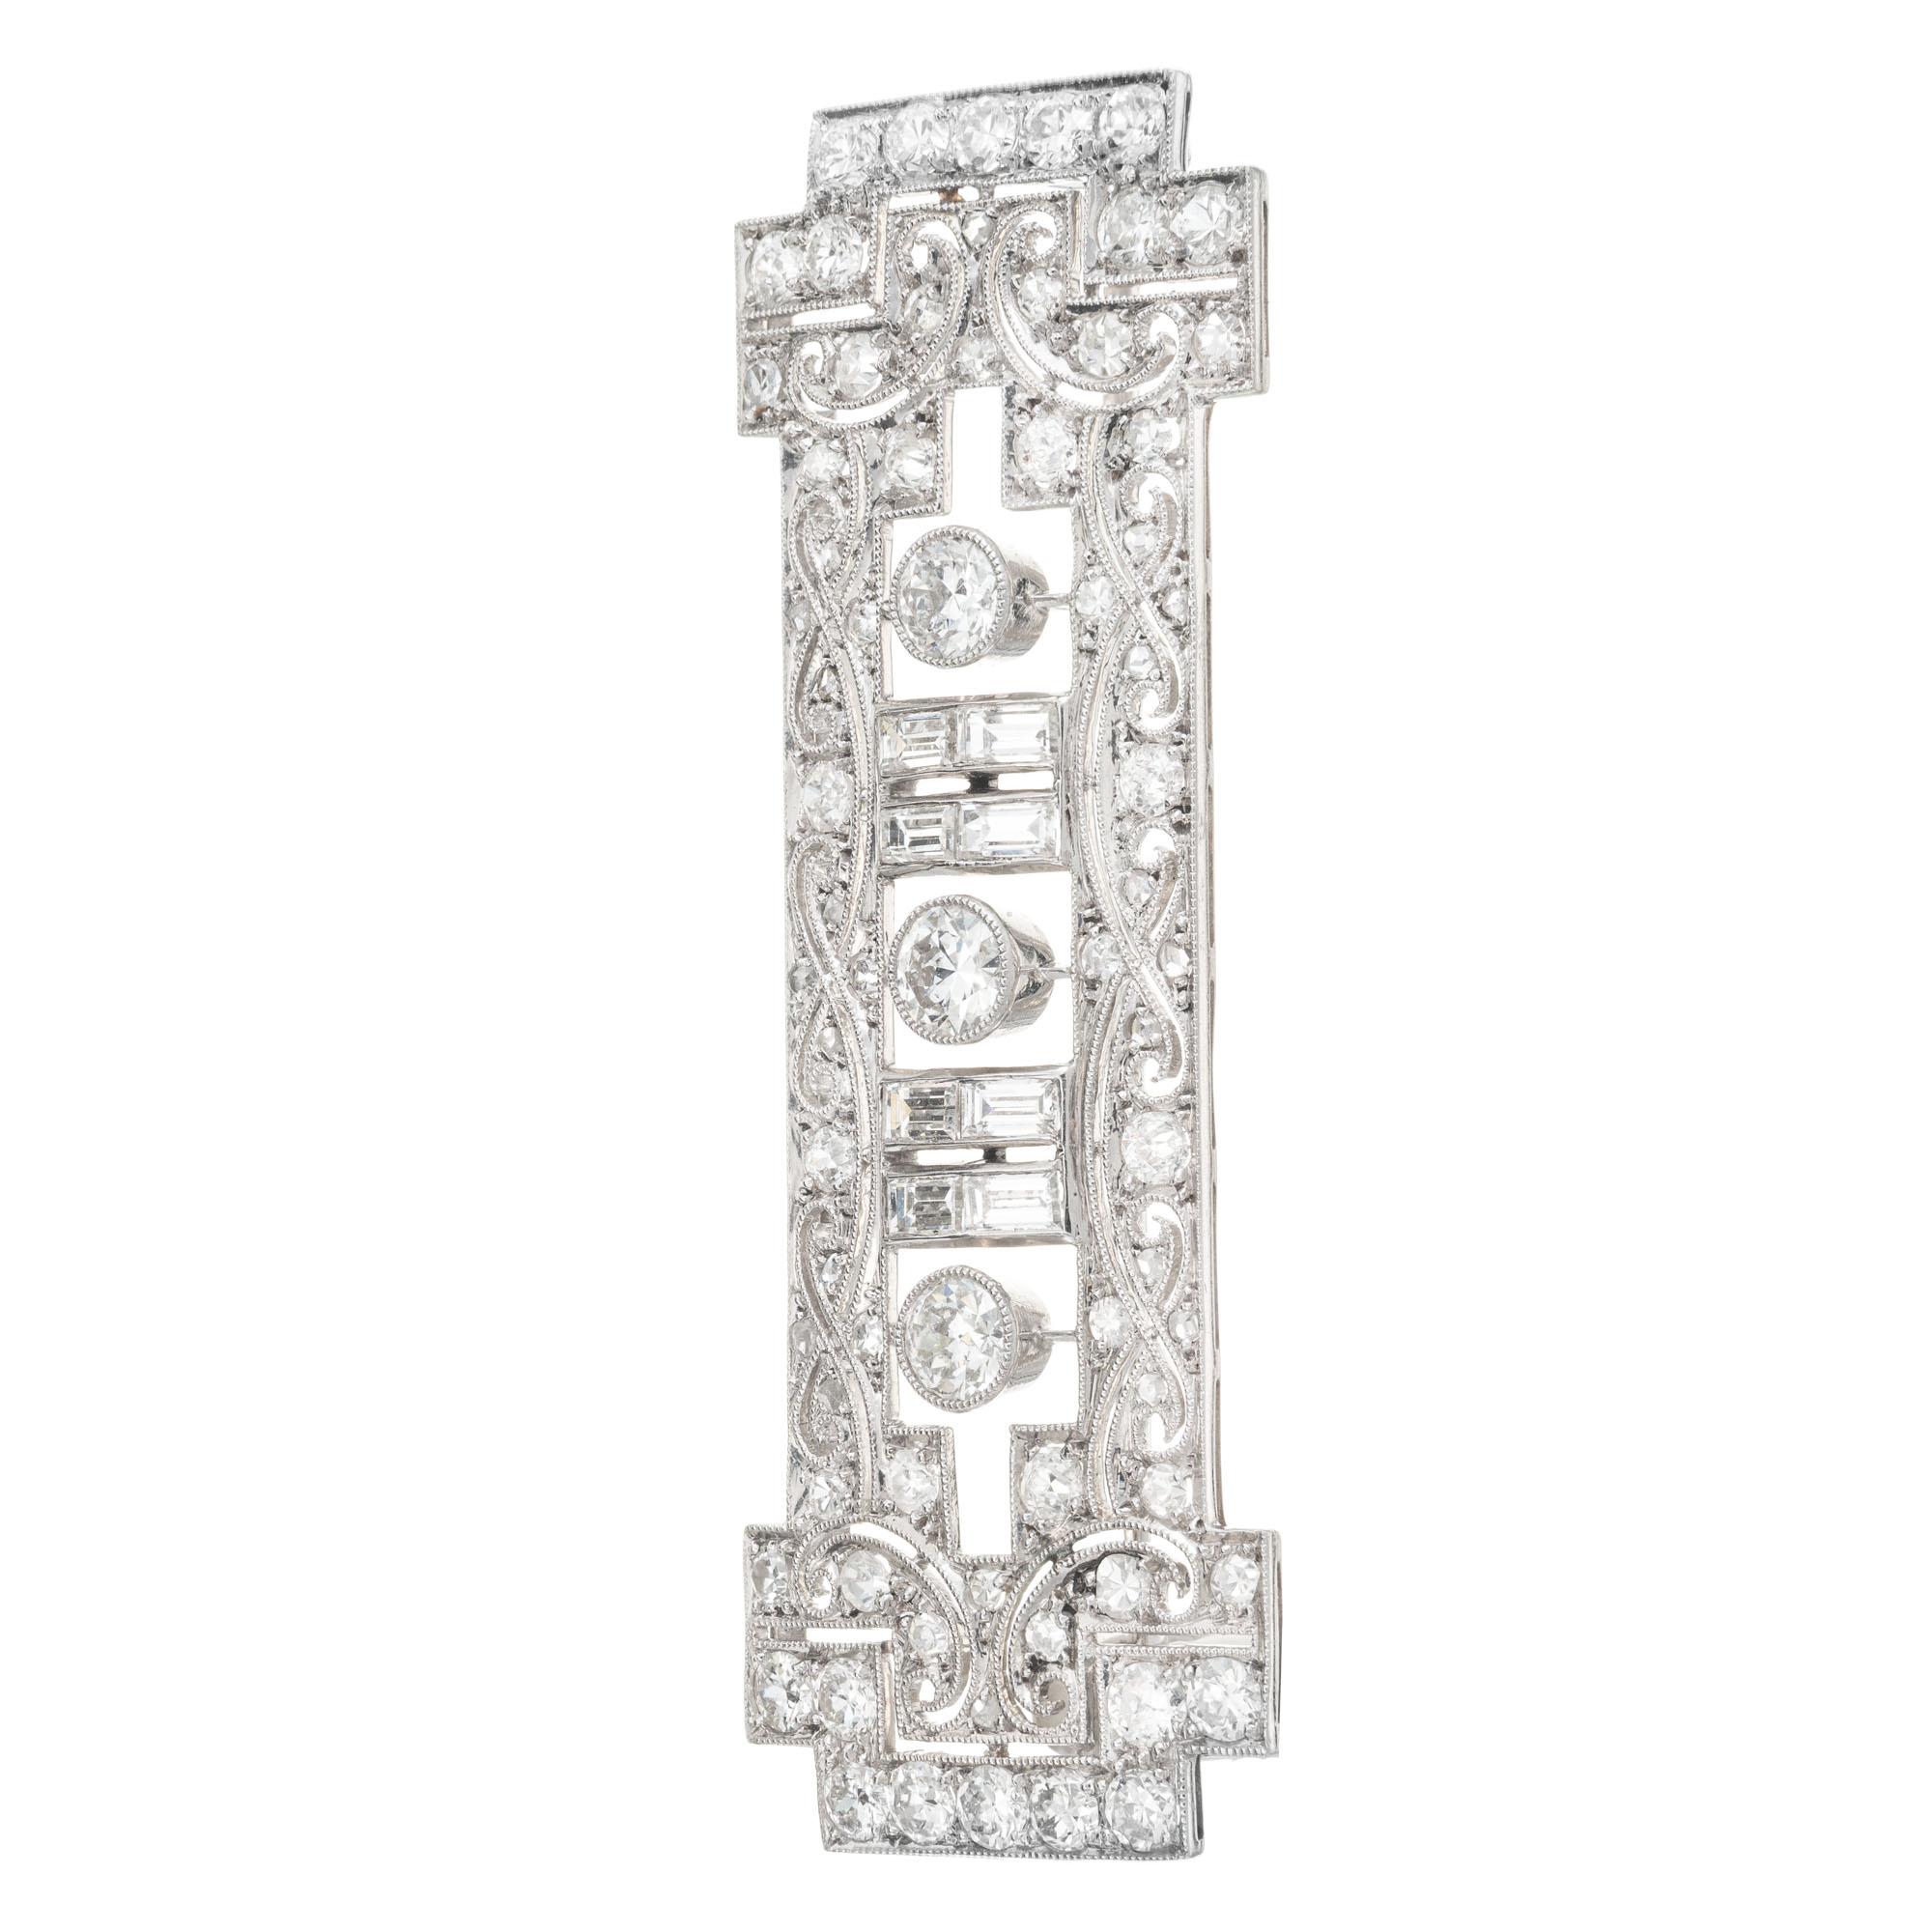 Vintage Edwardian handmade diamond bar brooch. 2.75cts of old European, baguette and round diamonds in a pierced open work platinum setting. circa 1910

3 Old European cut diamonds, G-H VS-SI approx. .75cts
8 step cut baguette diamonds, H VS approx.